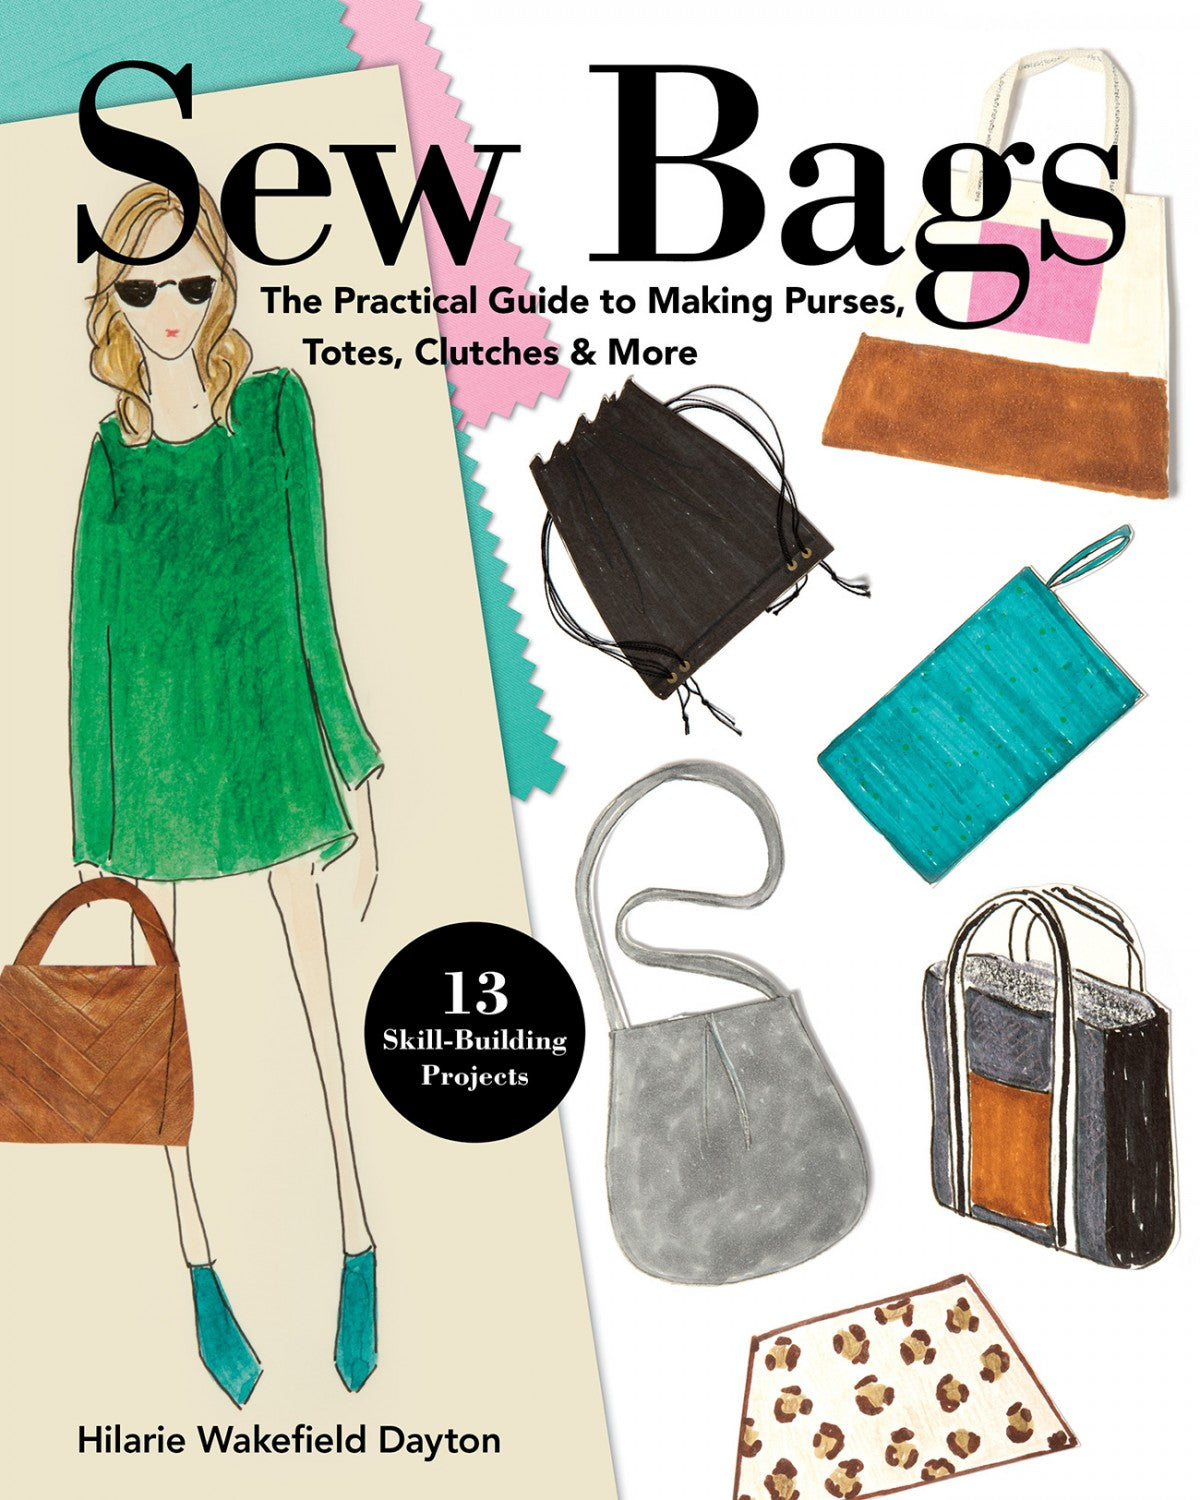 Sew Bags Sewing Guide Book by Hilarie Wakefield Dayton for Stash Books